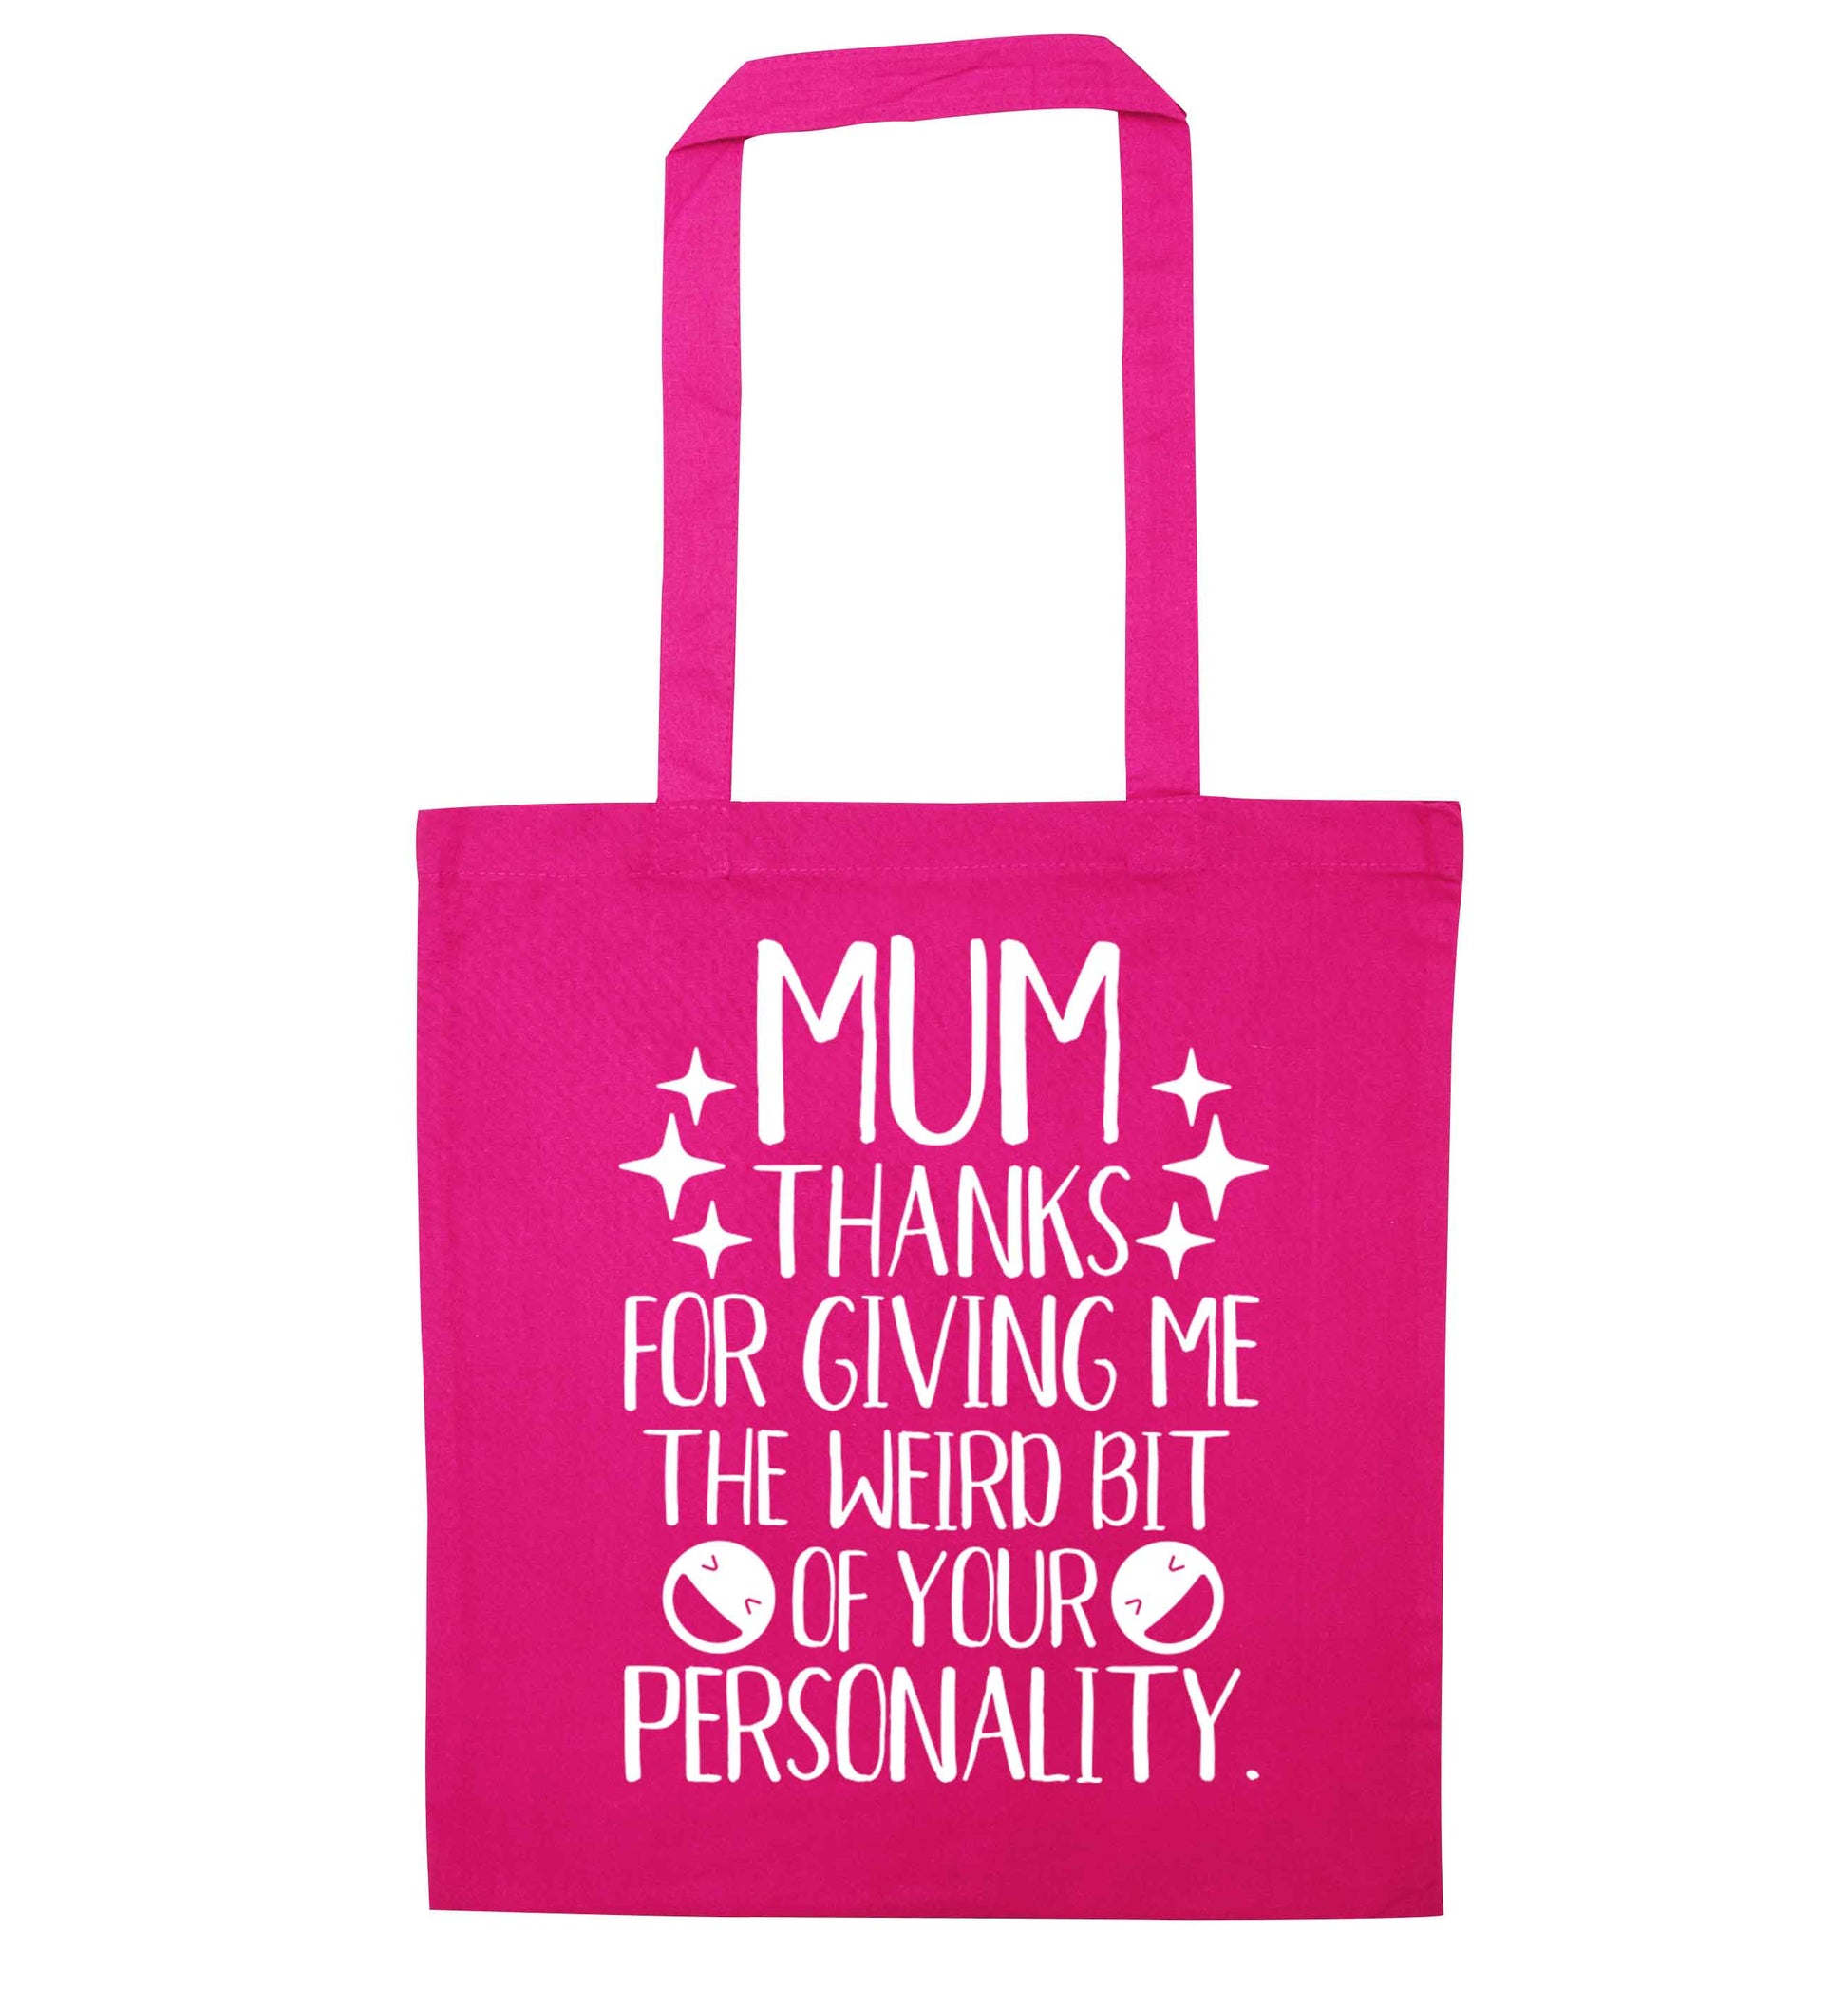 Mum, I love you more than halloumi and if you know me at all you know how deep that is pink tote bag